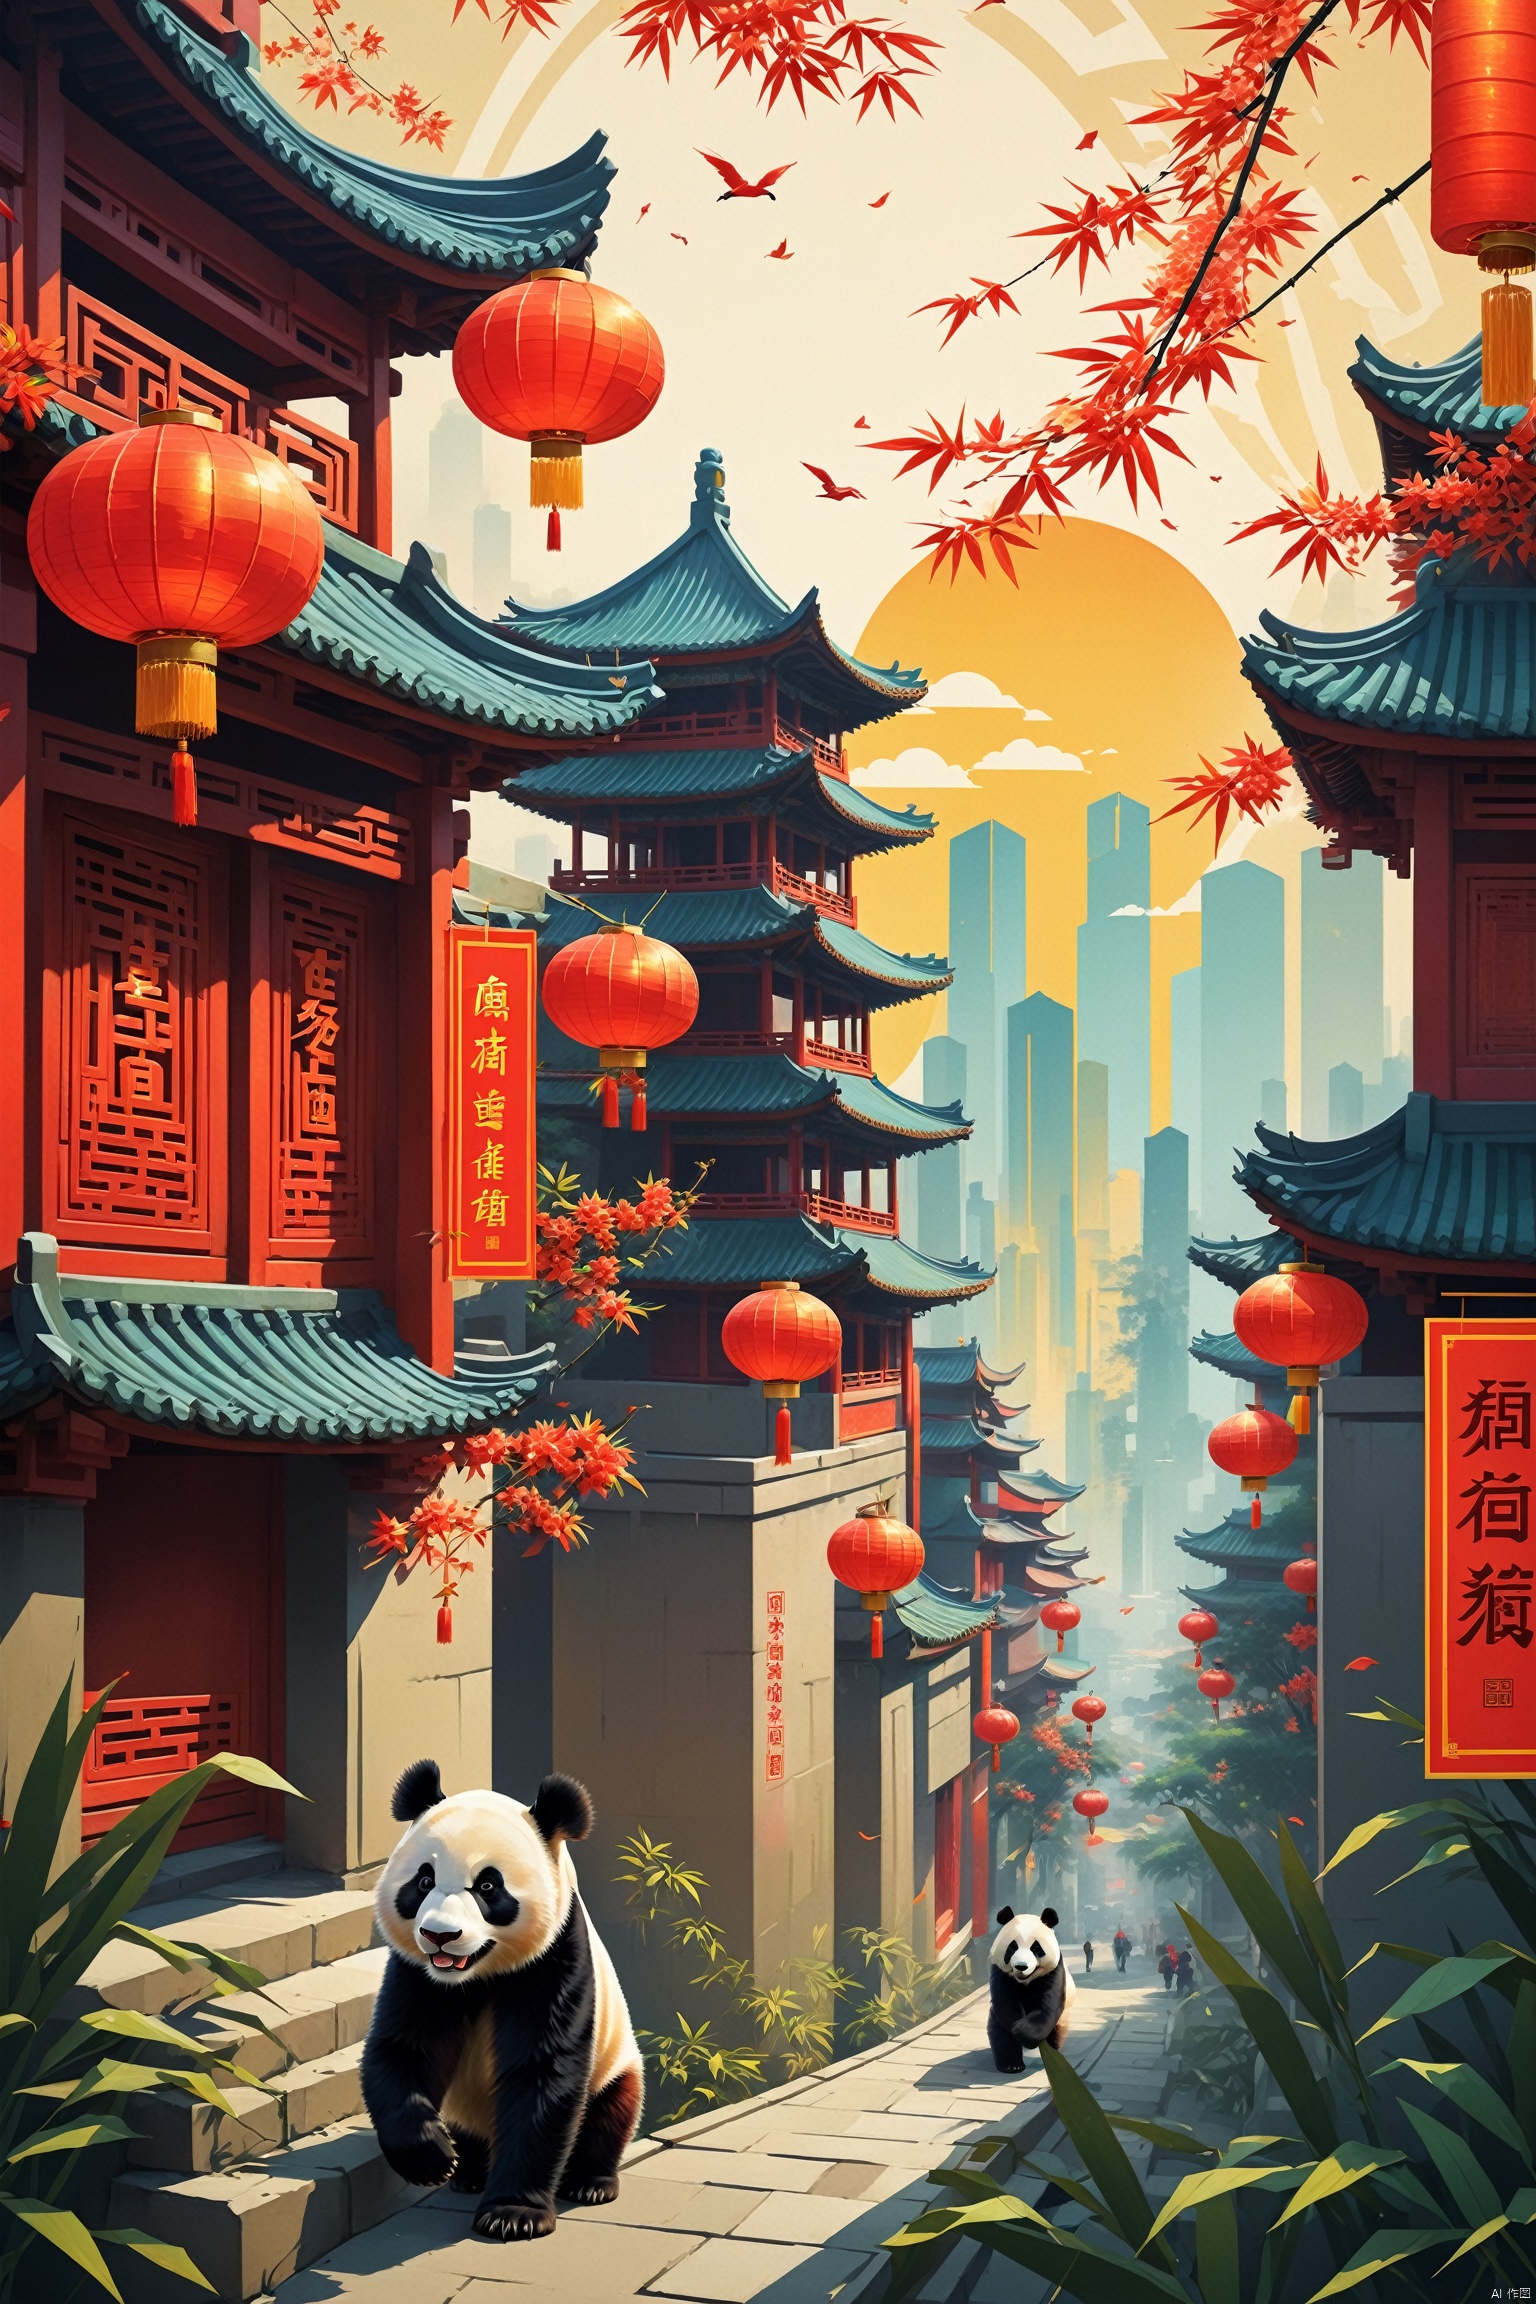  cubism, modern city, cityscape, happy figure, happy kids, pandas, bamboos, diagonal composition, geometric shapes, vibrant colors, cyberpunk theme. good weather, Chinese theme, rising sun, New Year poster, Happy New Year poster. red lanterns, SCI-FI